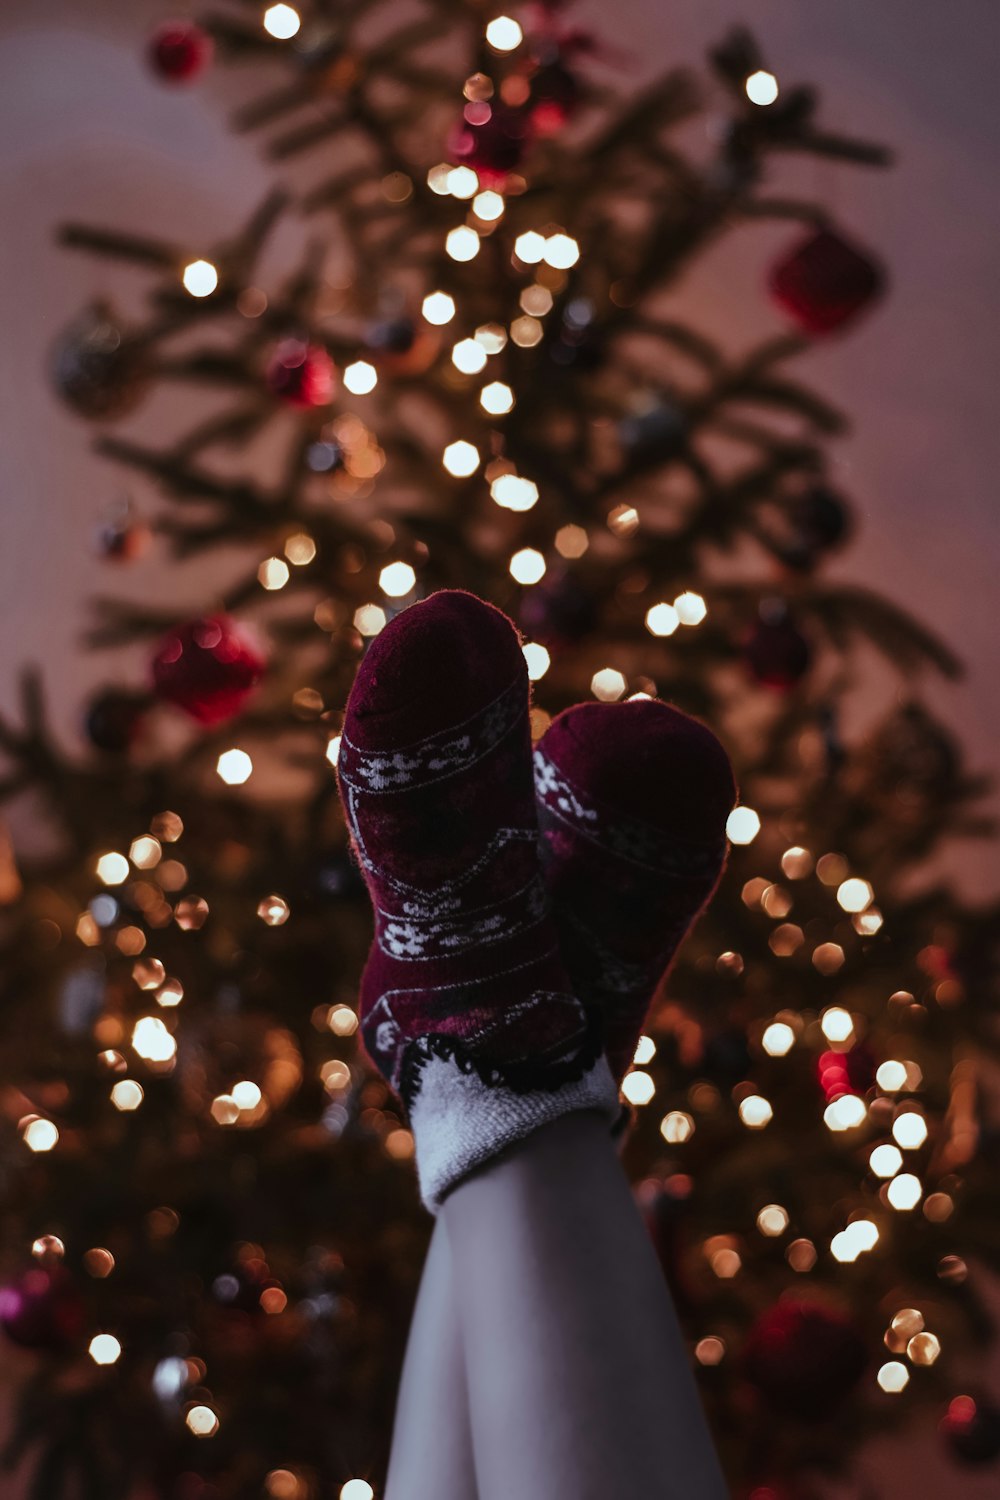 a person's feet wearing mittens in front of a christmas tree